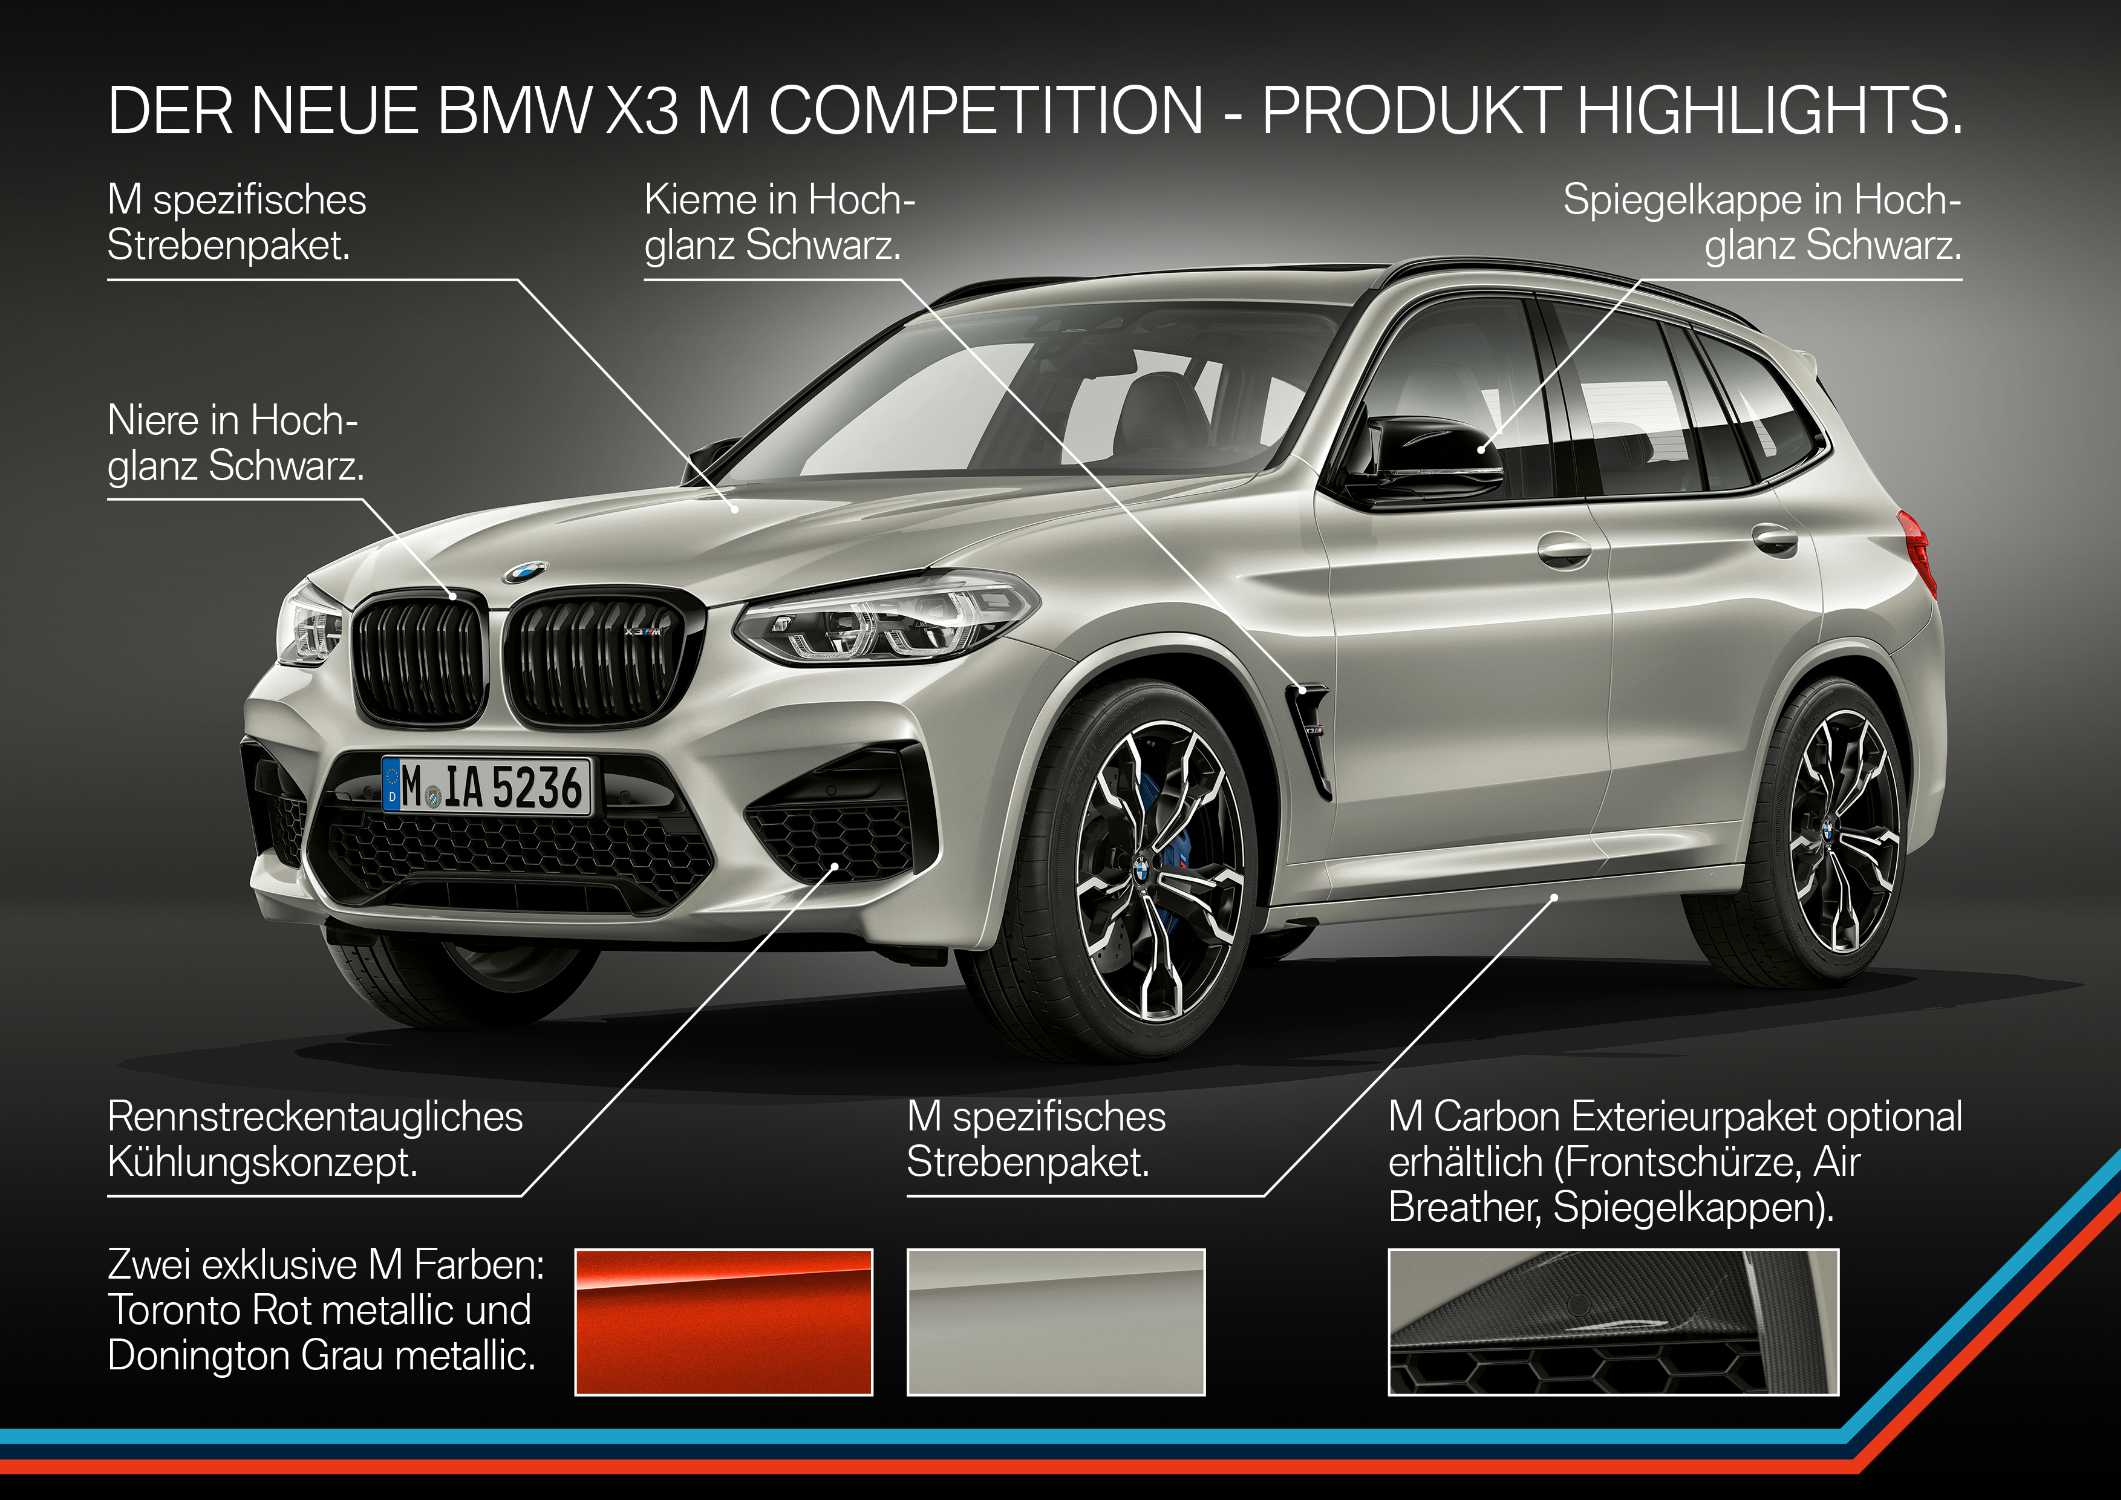 The all-new BMW X3 M Competition (02/2019).